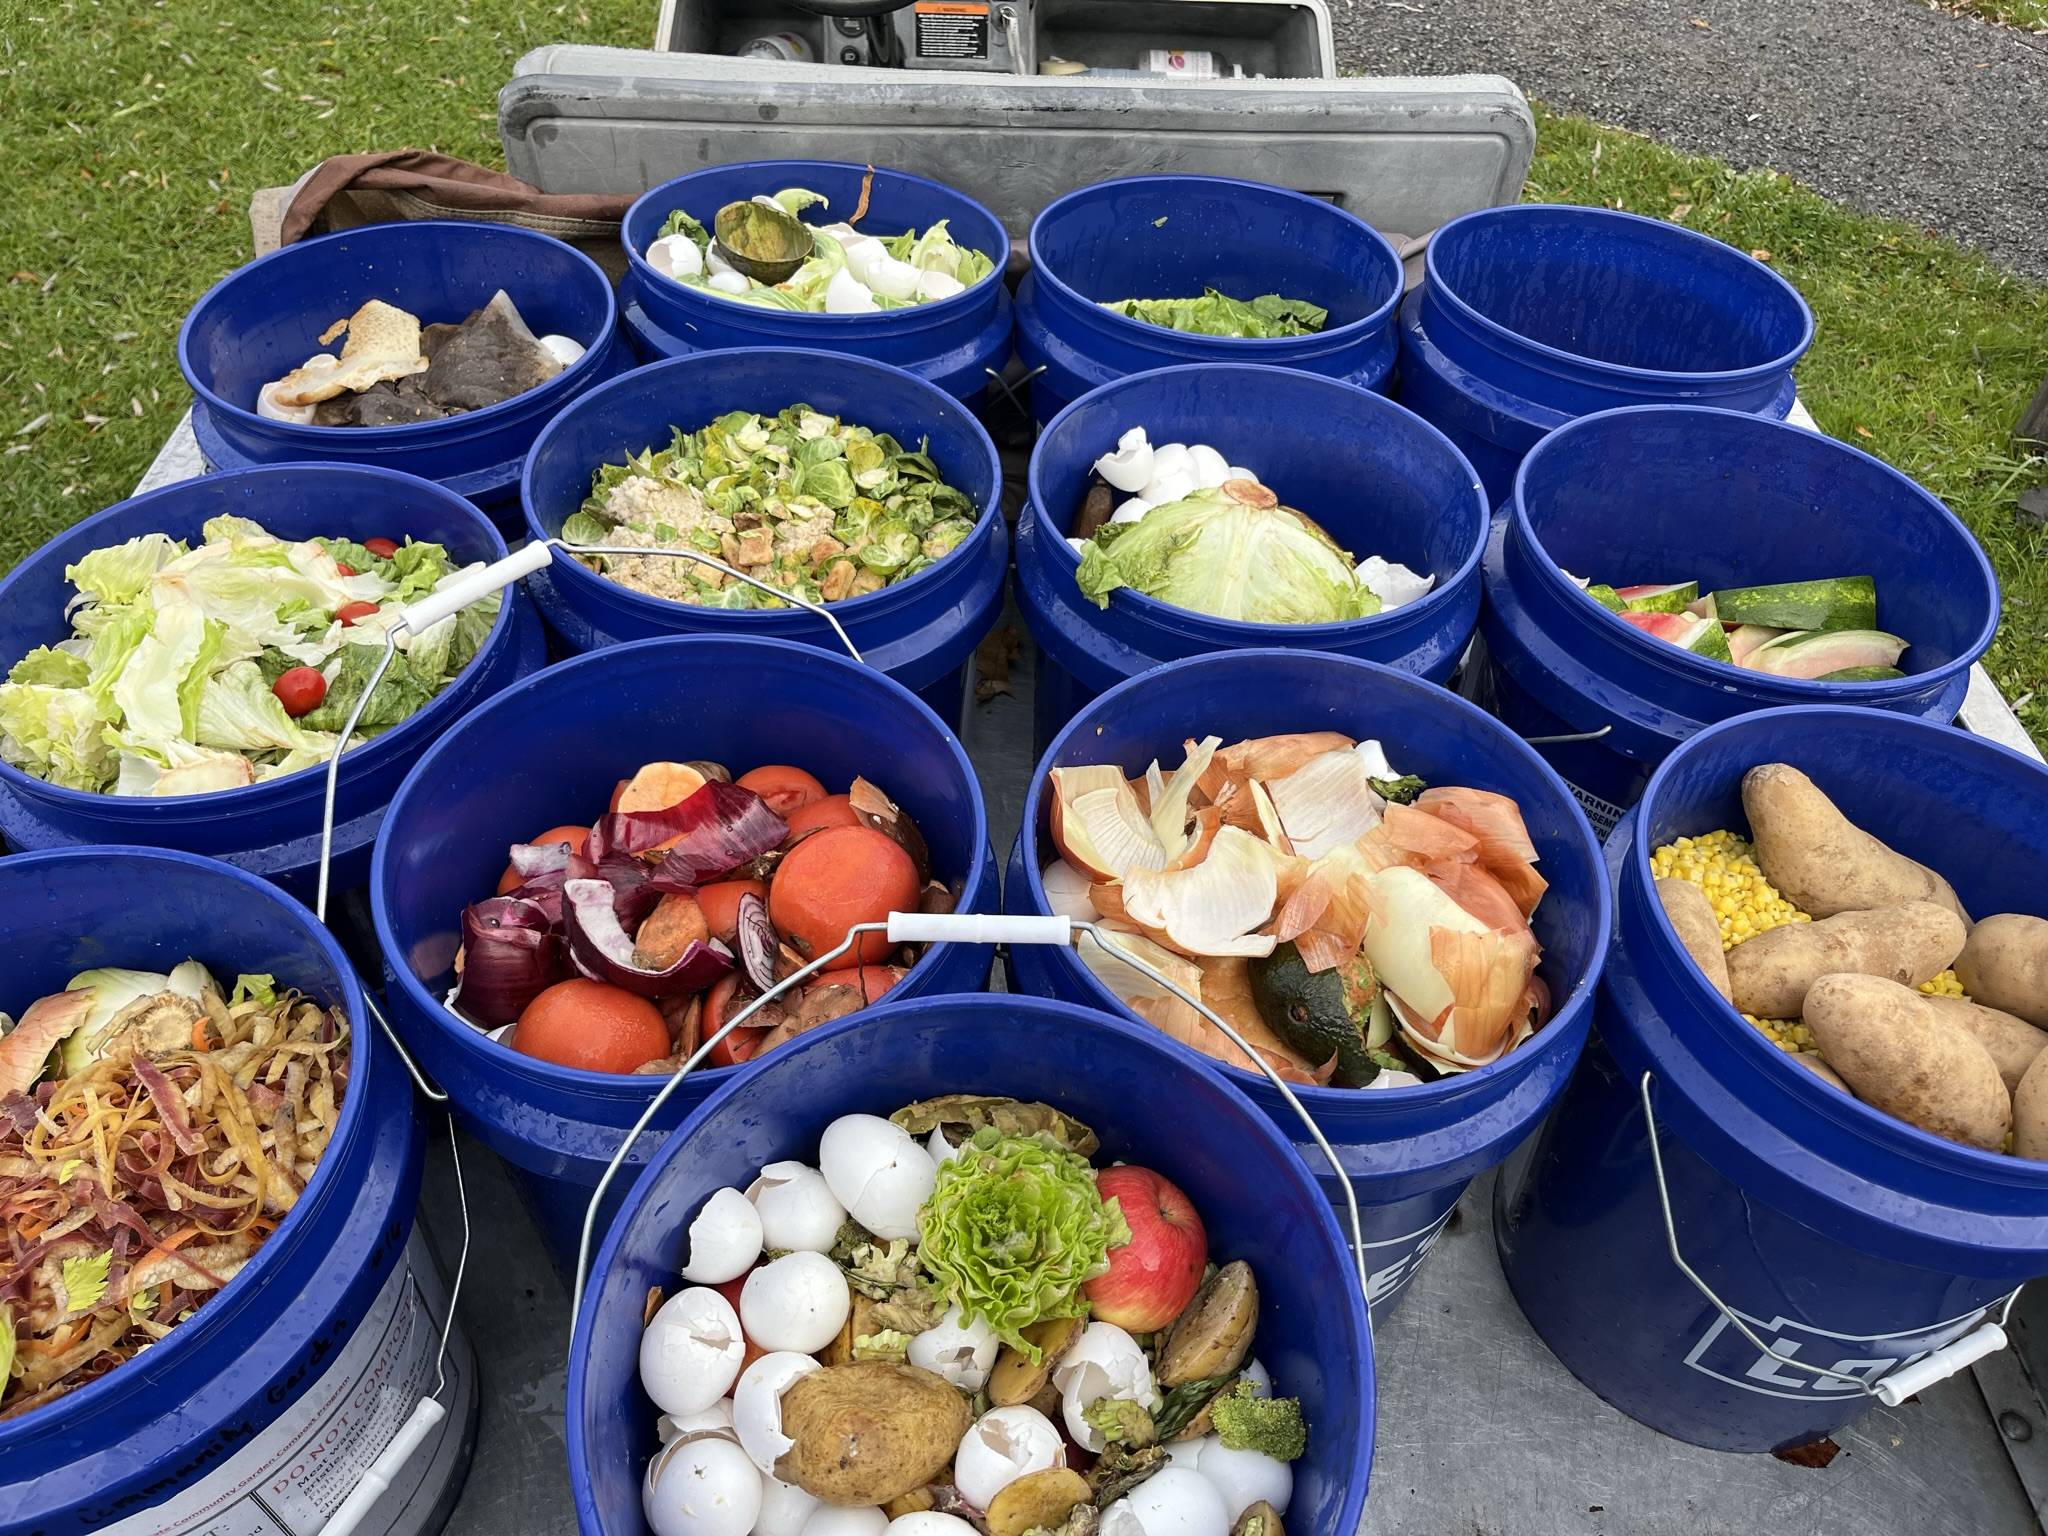 Several blue 5-gallon buckets full of compostable items, such as produce scraps, eggshells, etc.